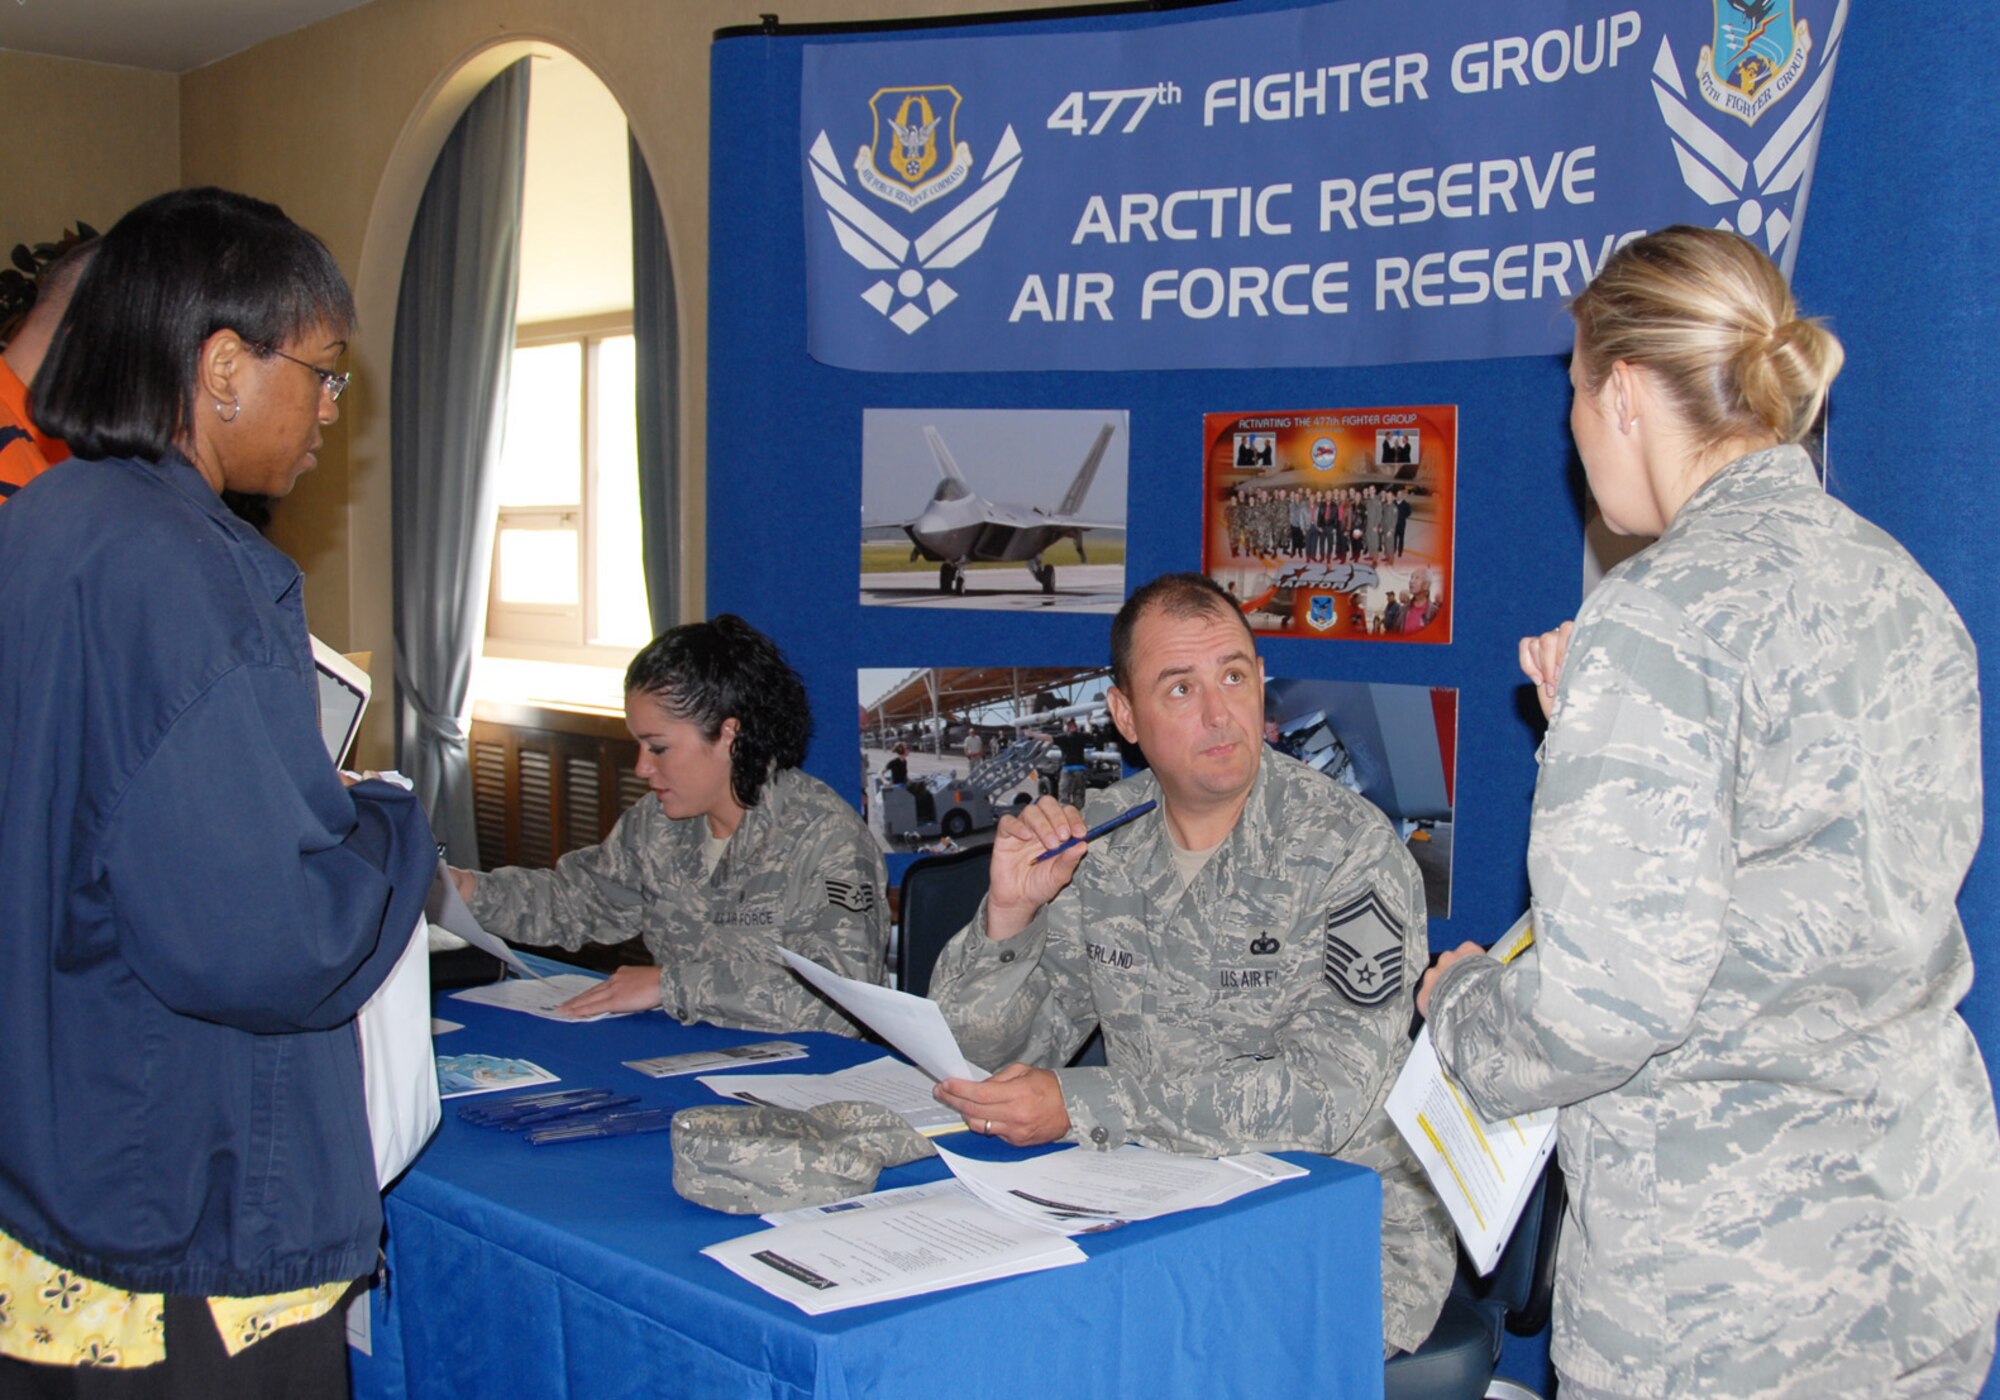 Recruiters from the 477th Fighter Group answer questions and provide information to Individual Ready Reserve members at a one-day IRR muster at Elmendorf Air Force Base, Alaska, June 12, 2009. Musters are designed to obtain updated contact information for IRR members and their availability for mobilization. (U.S. Air Force photo/Staff Sgt. Andrea Knudson)